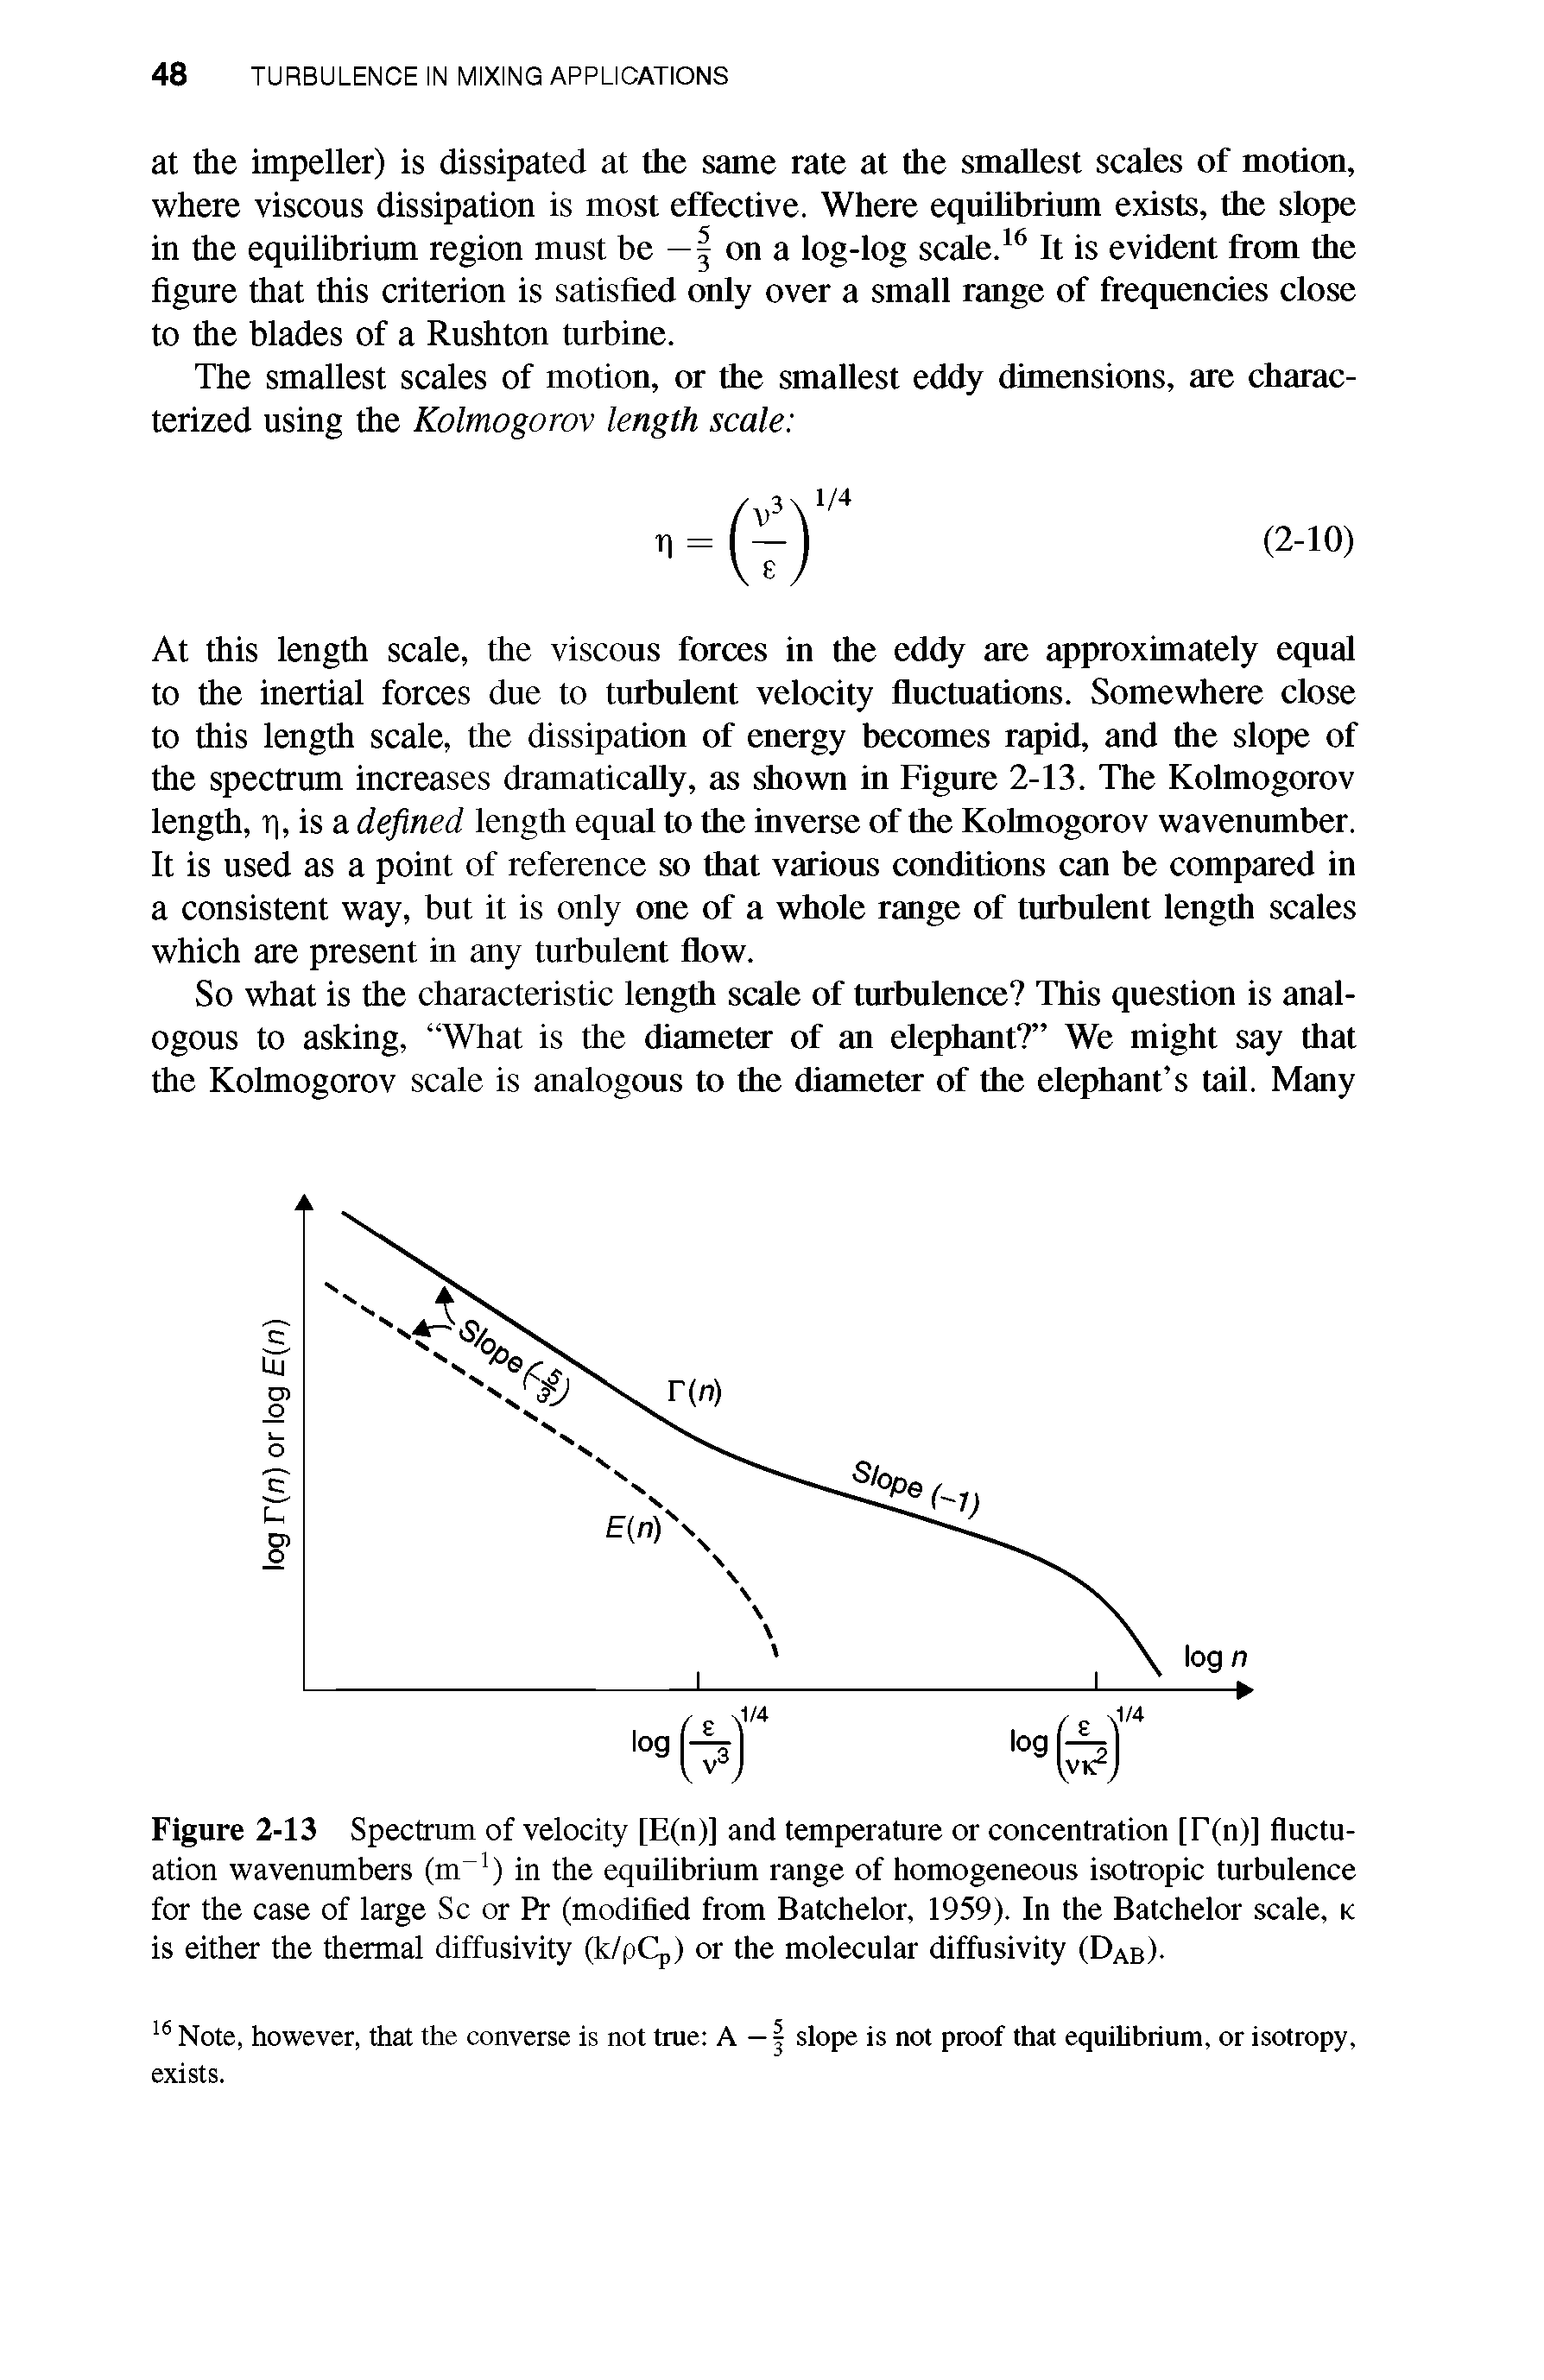 Figure 2-13 Spectrum of velocity [E(n)] and temperature or concentration [r(n)] fluctuation wavenumbers (m ) in the equilibrium range of homogeneous isotropic turbulence for the case of large Sc or Pr (modified from Batchelor, 1959). In the Batchelor scale, k is either the thermal diffusivity (k/pCp) or the molecular diffusivity (Dab)-...